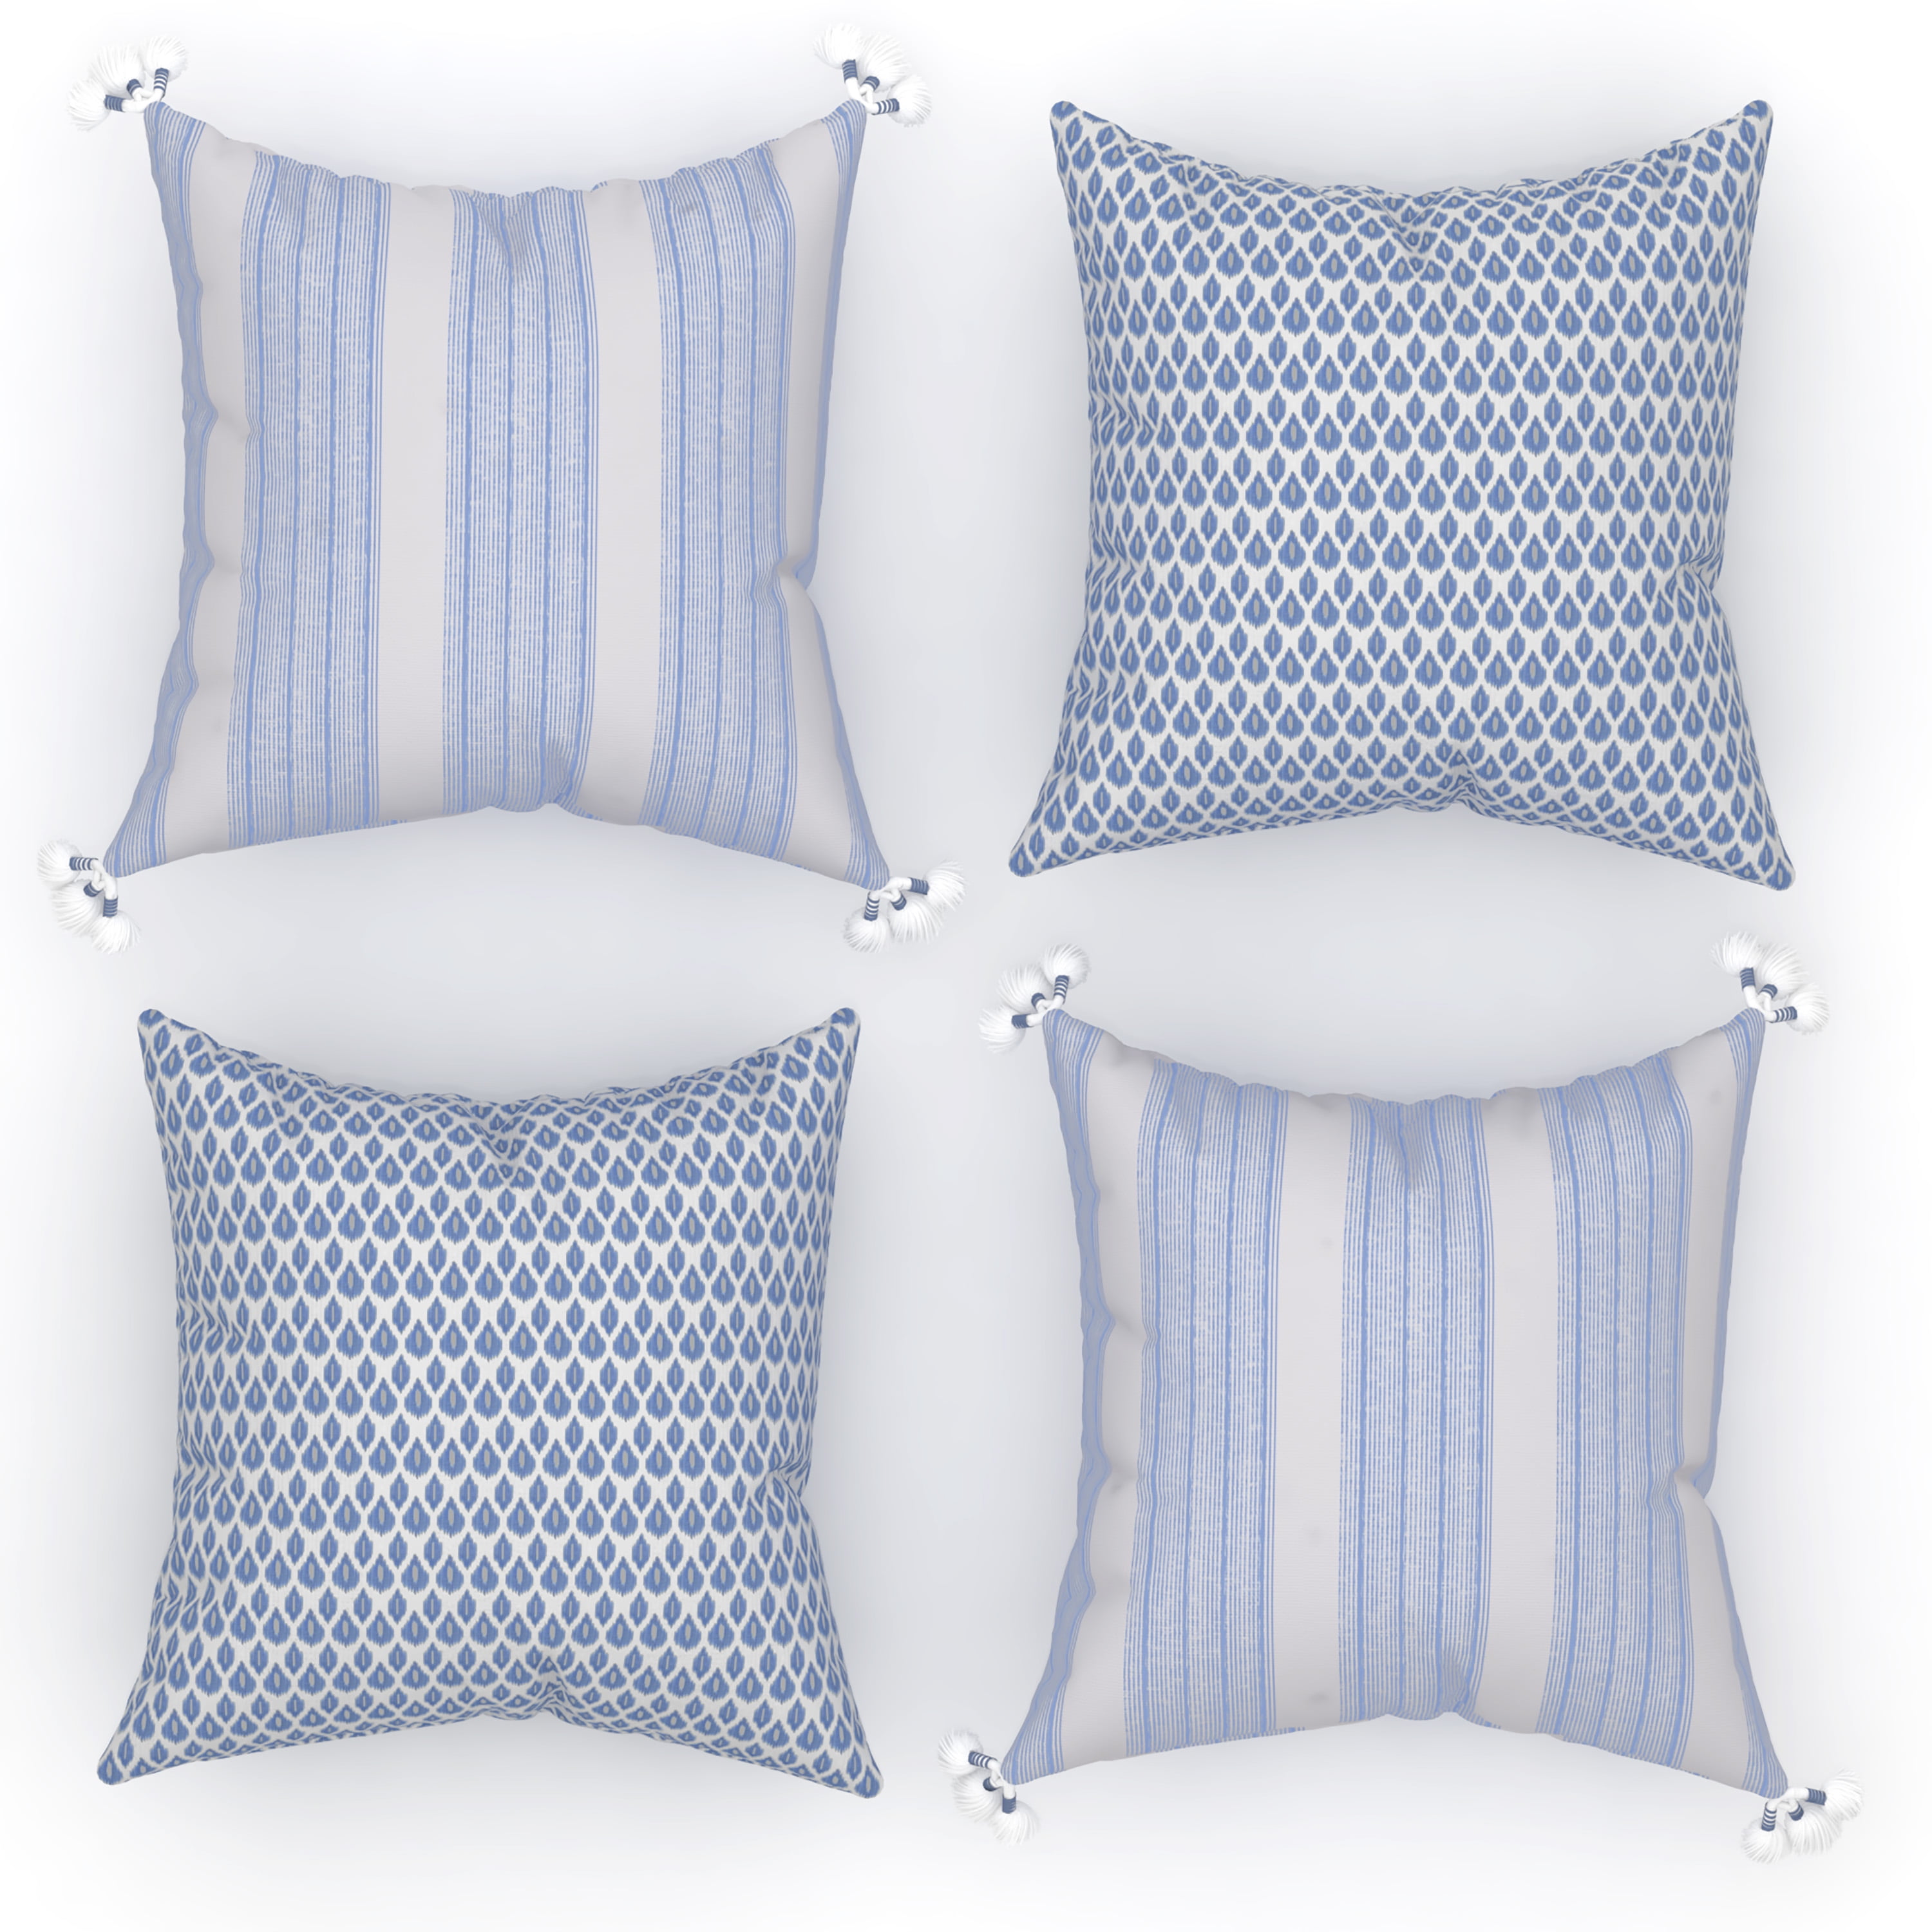 2 PCS Outdoor Throw Pillows Included Inserts,18X18 Inches Blue